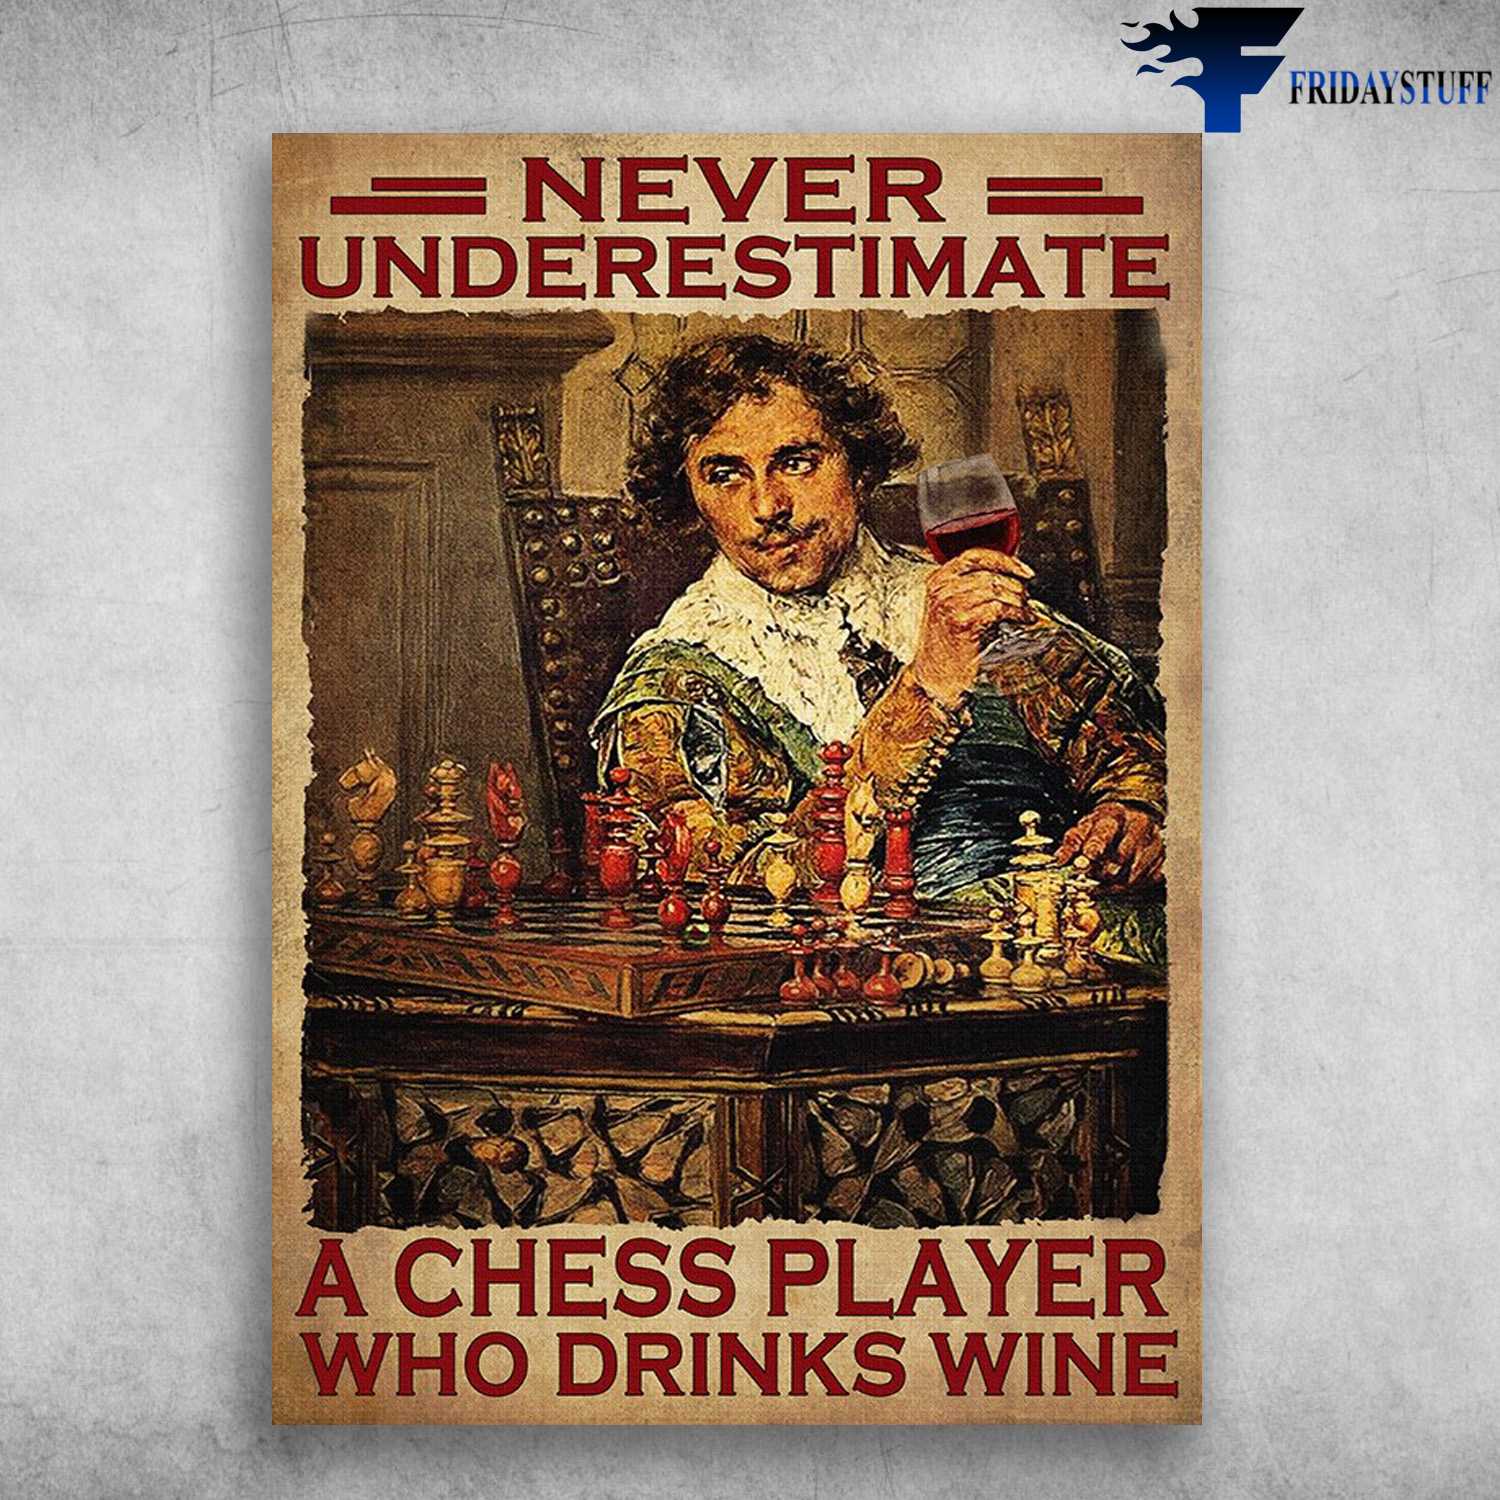 Playing Chess With Wine - Never Underestimate A Chess Player, Who Drinks Wine